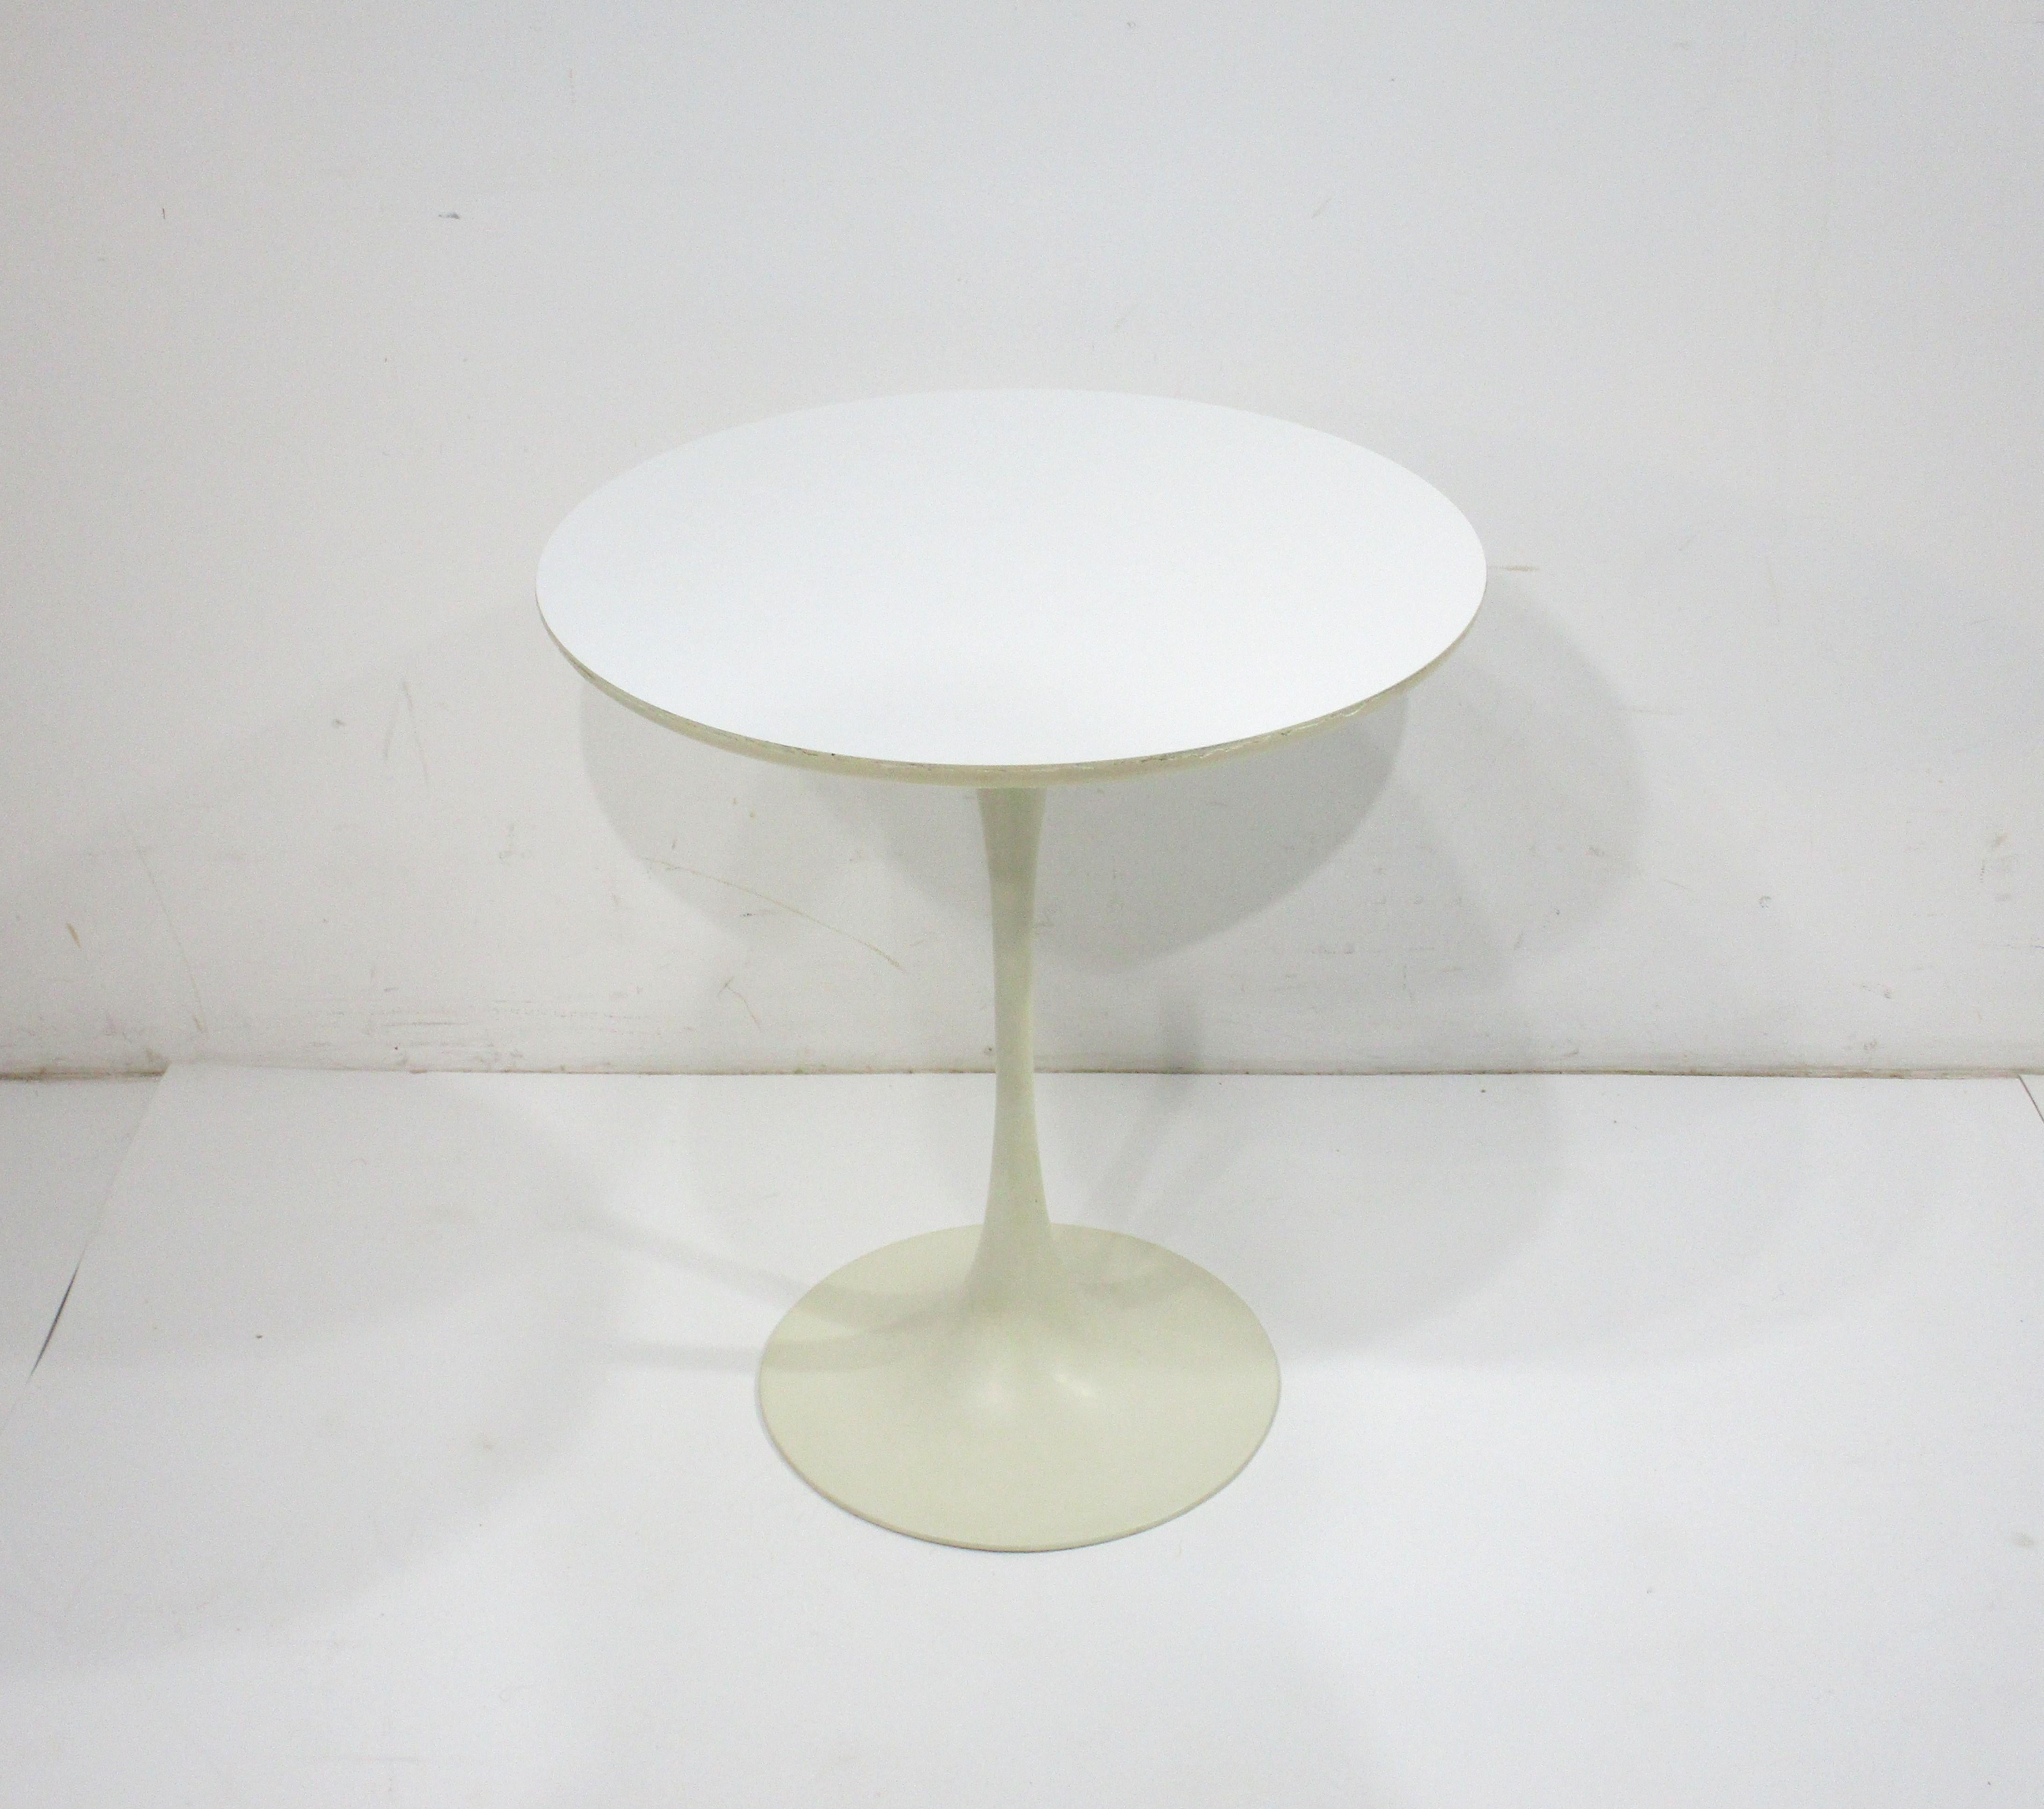 A vintage tulip side table with round Laminate top having a nice soft curved edge . The heavy sculptural cast metal base makes the table very sturdy and in a cream white makes this iconic piece of Mid Century design a true timeless classic .